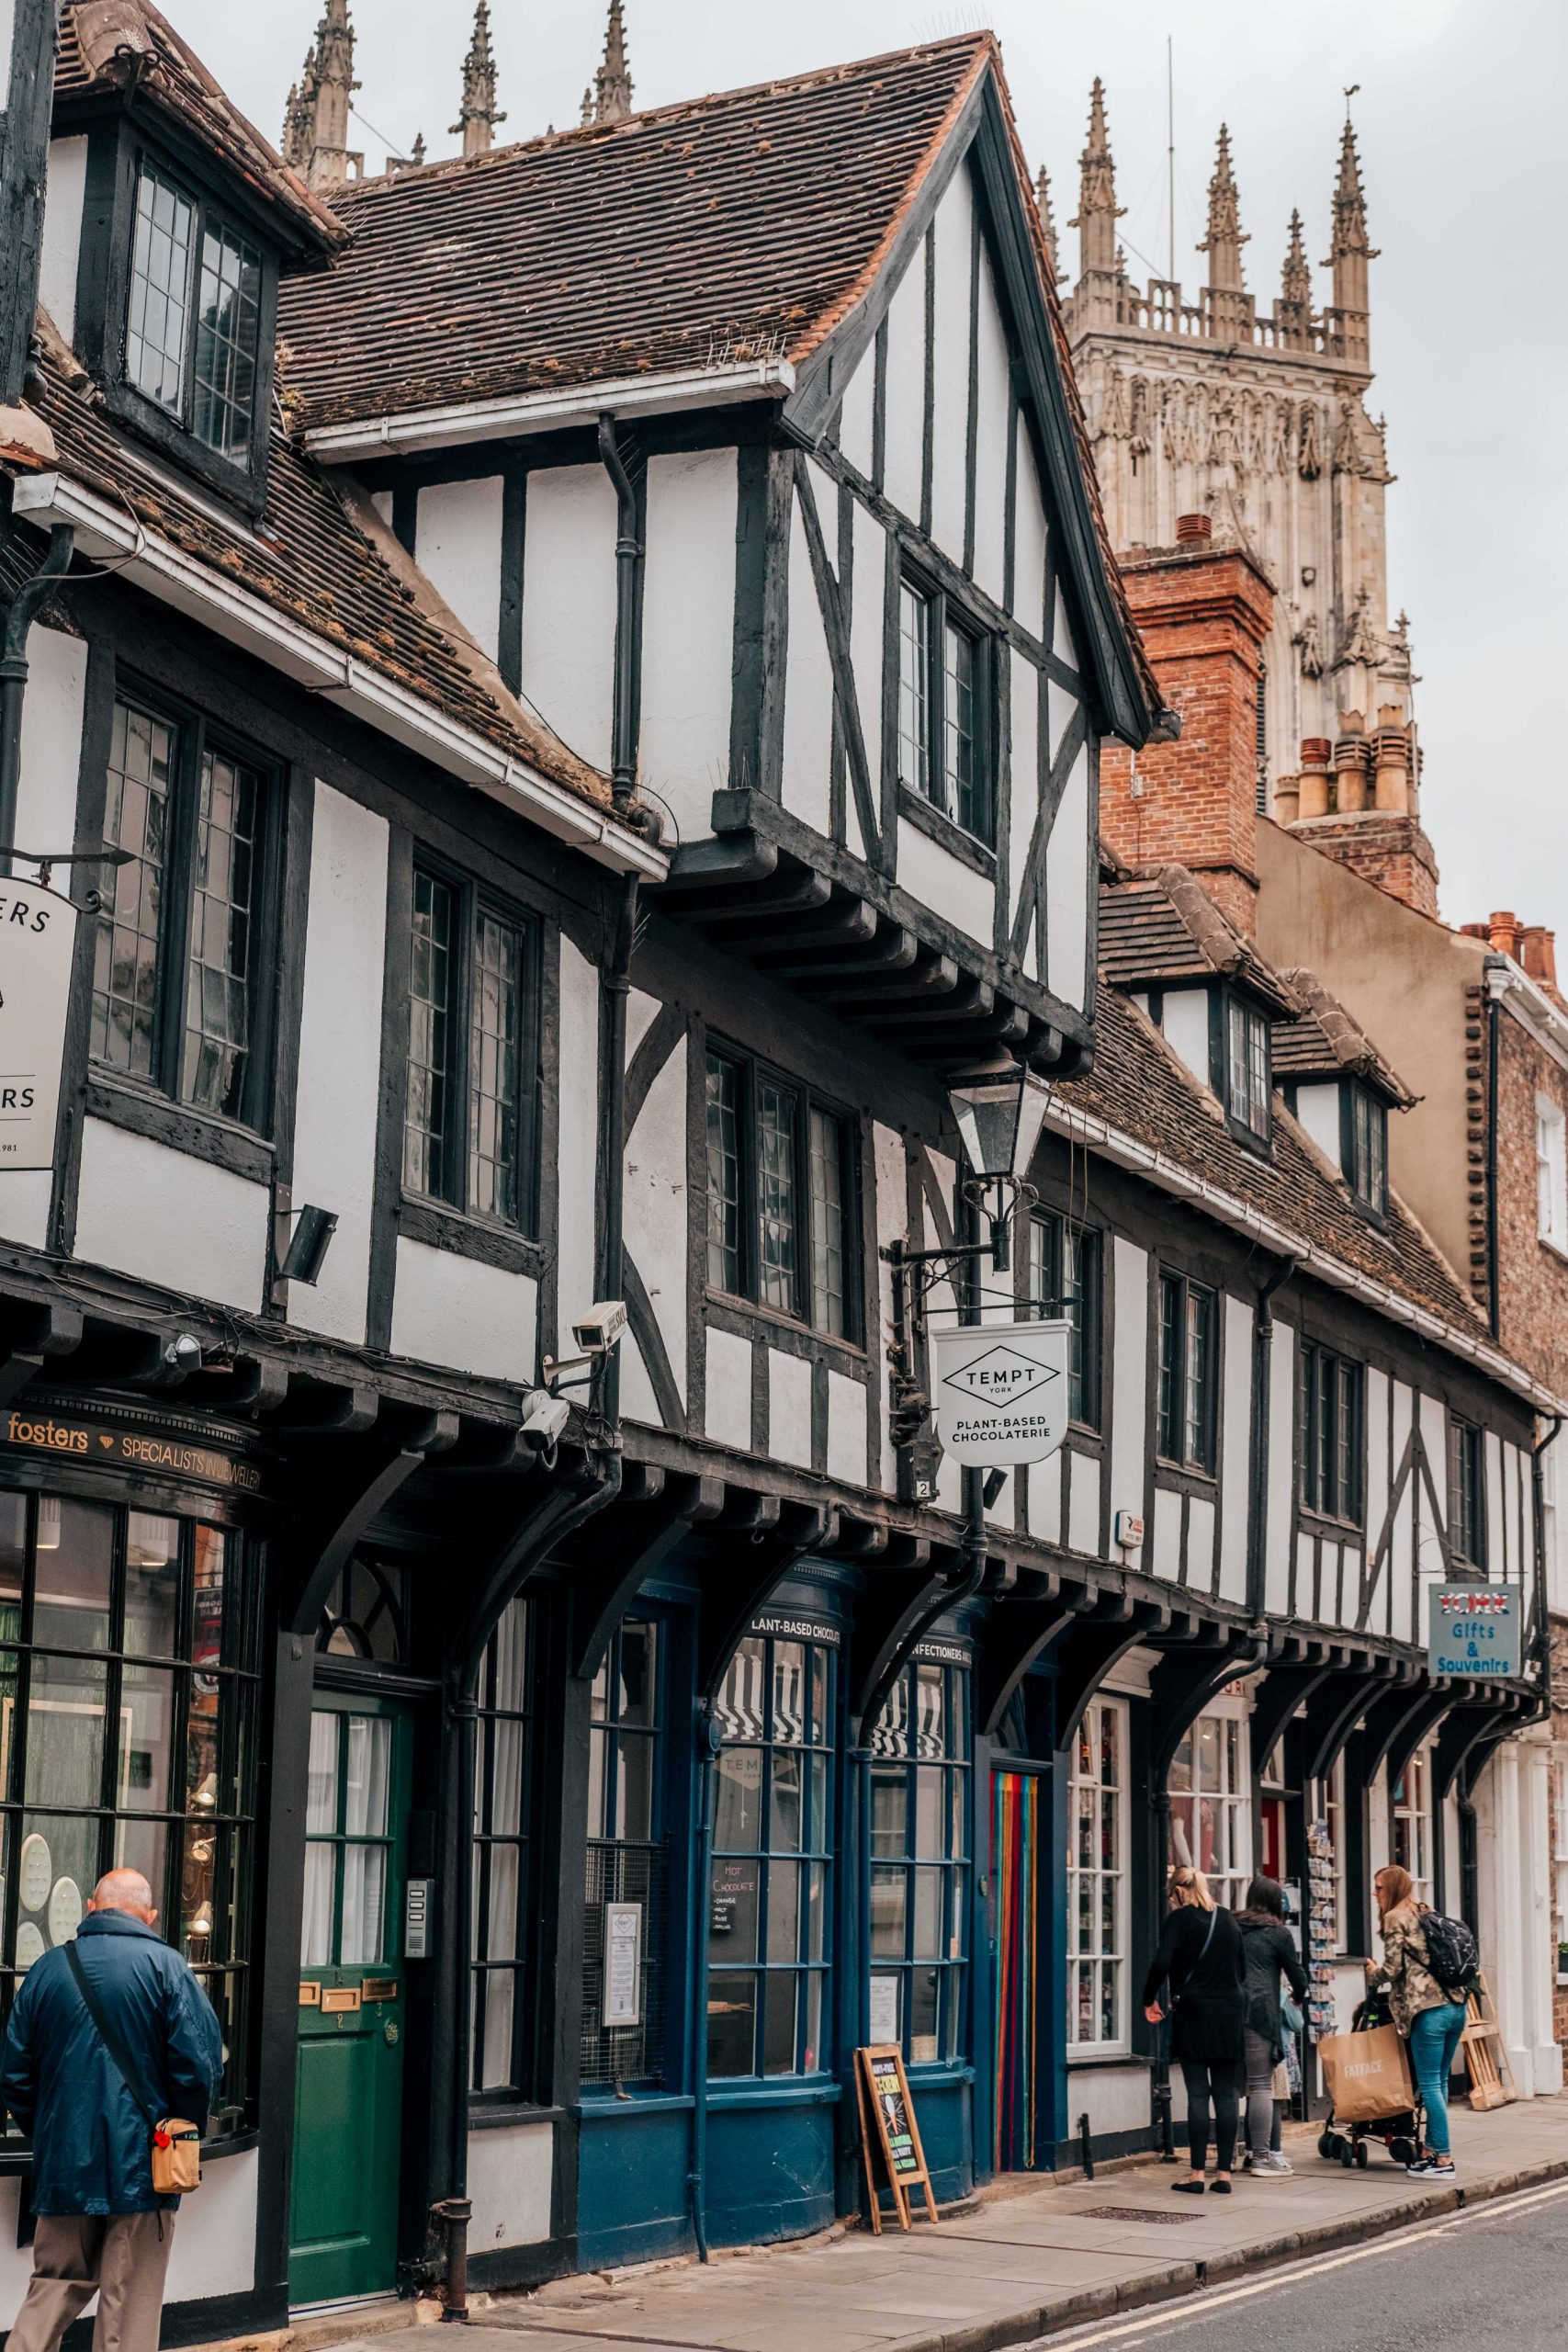 Charming buildings in York England